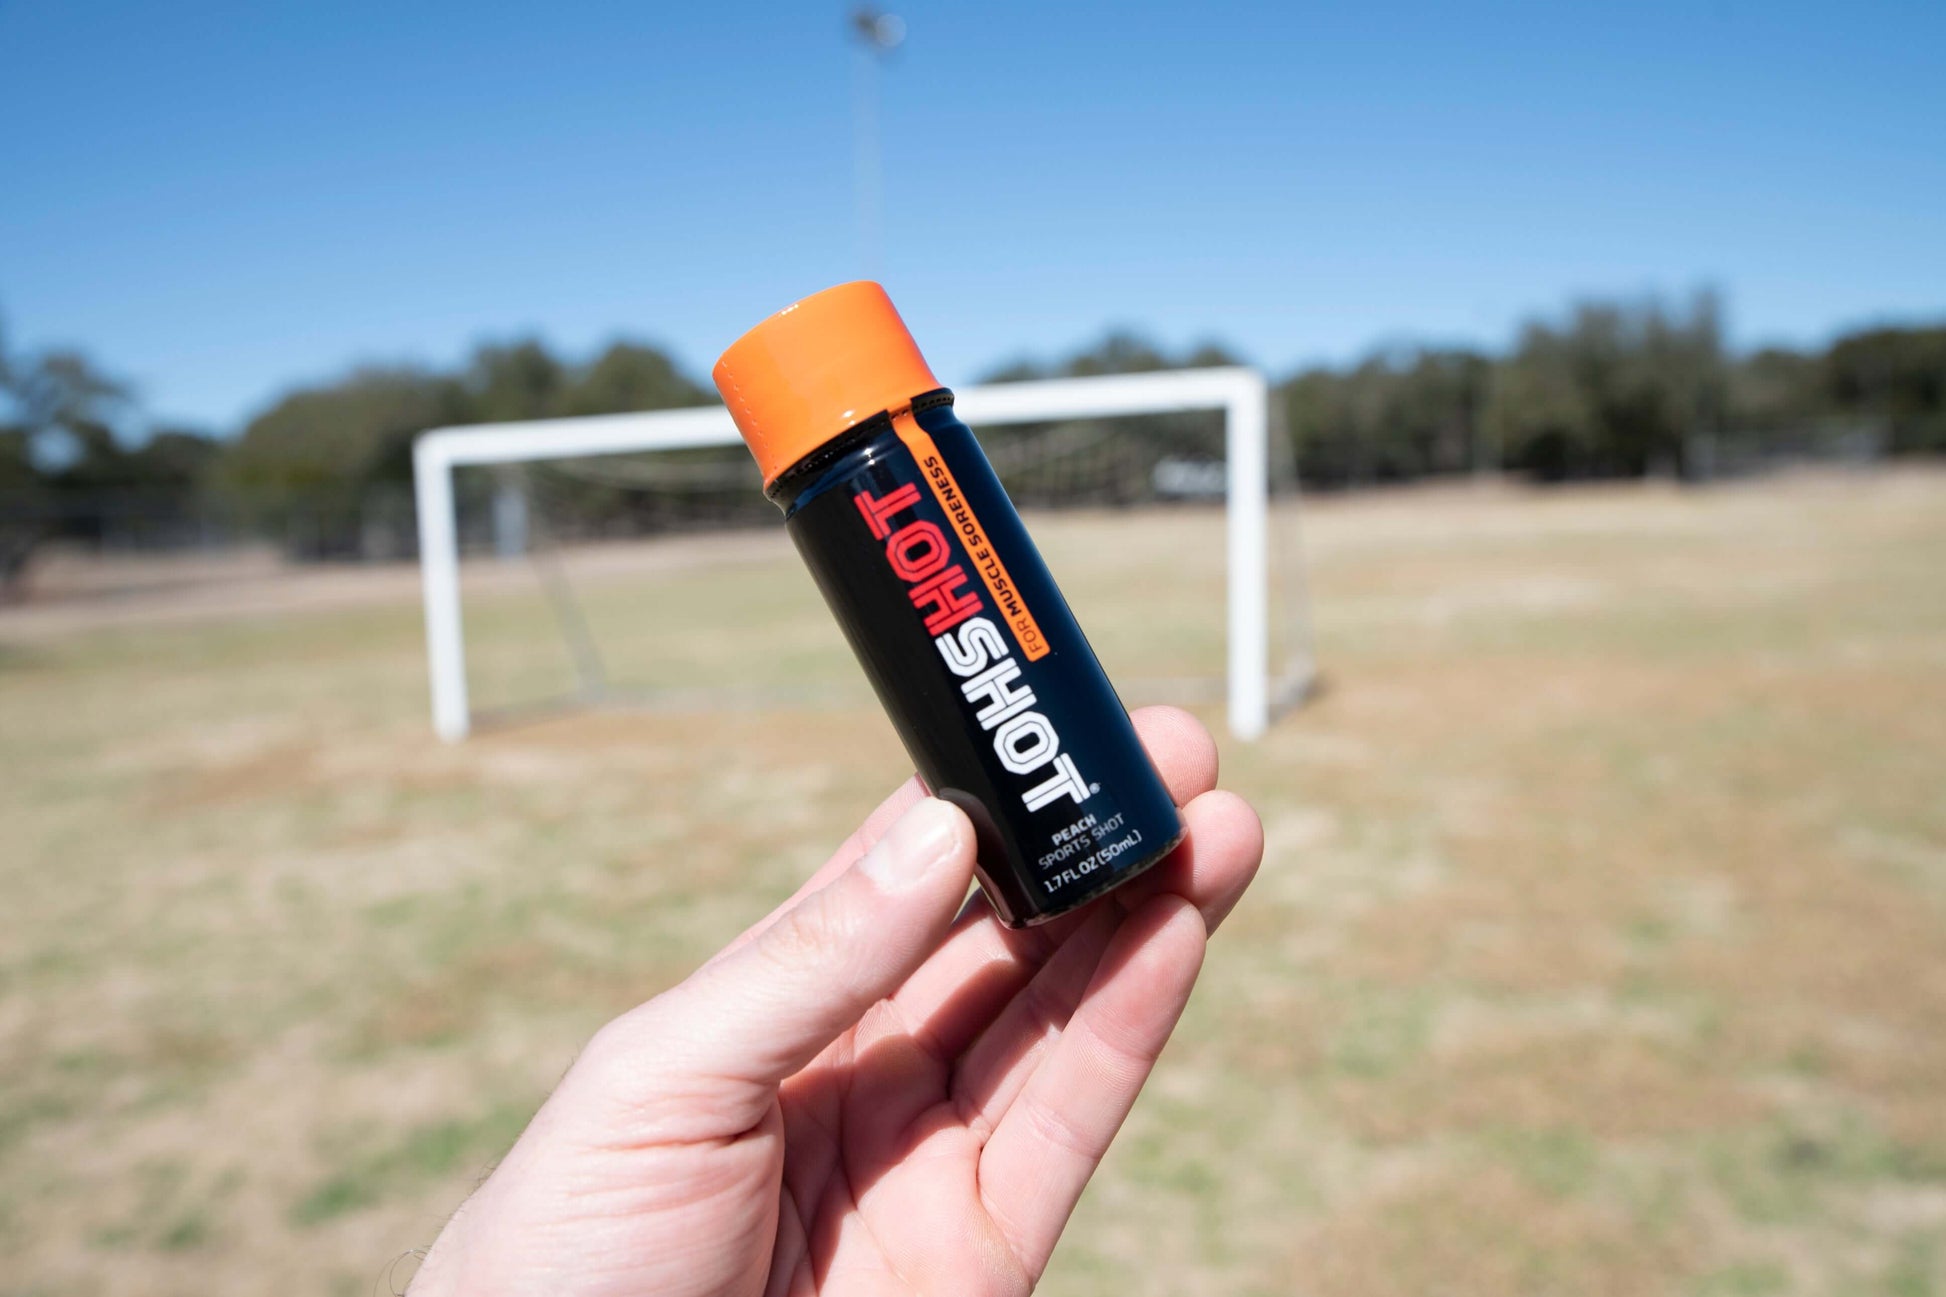 HOTSHOT for Athletic Muscle Soreness on Soccer Field